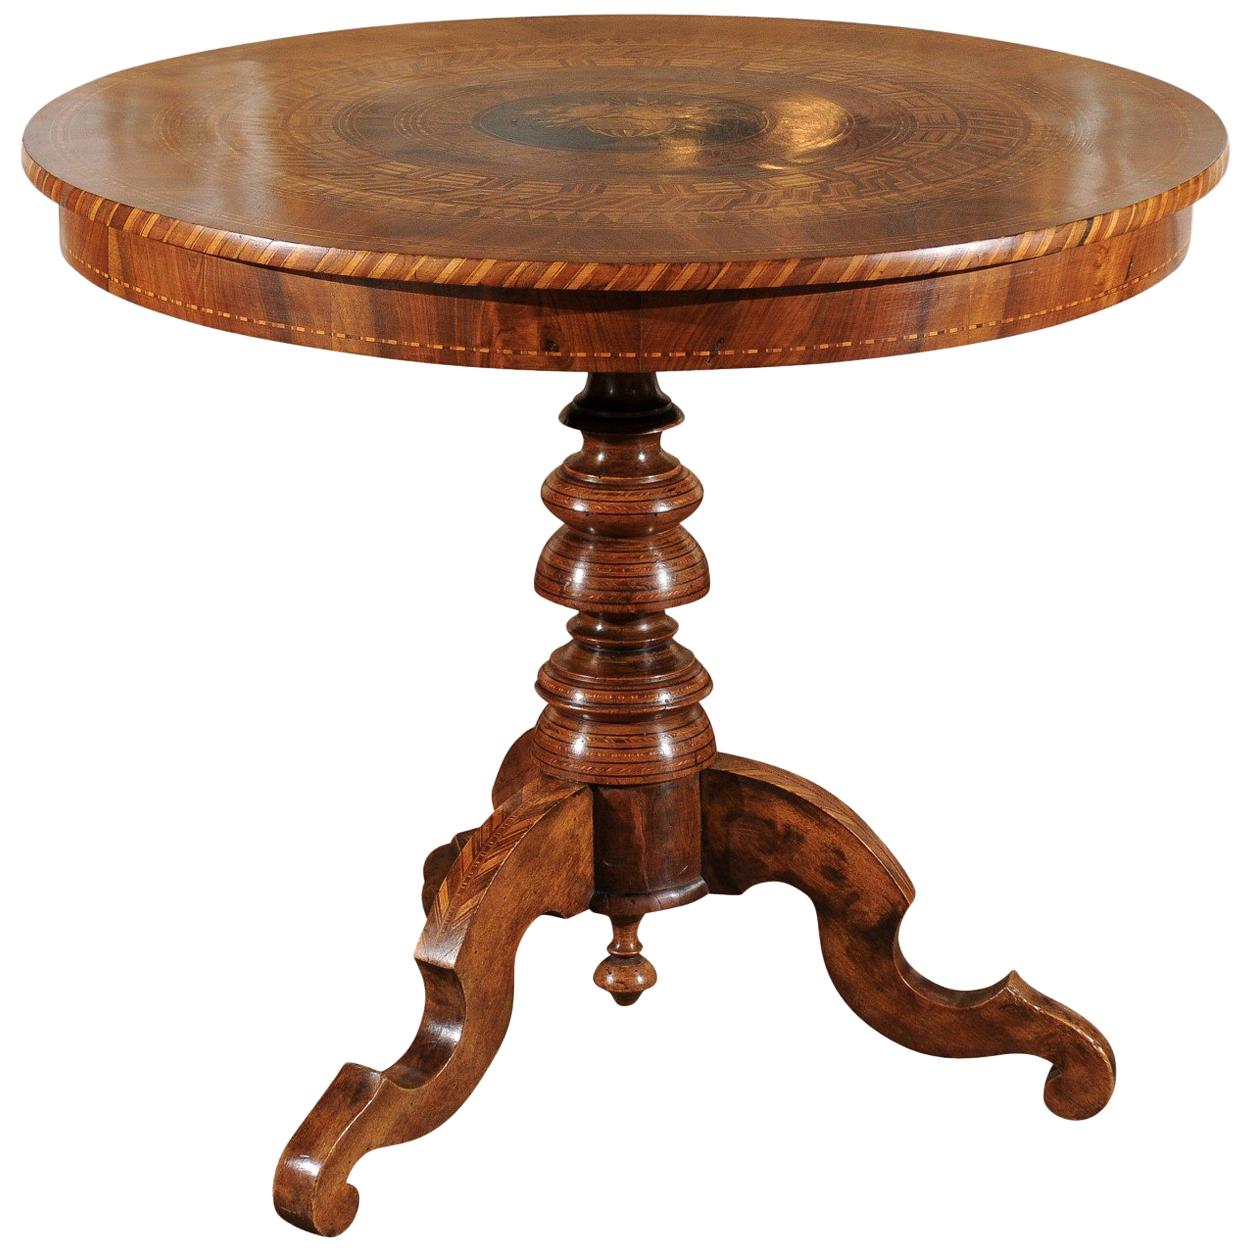 French Napoleon III Pedestal Table with Marquetry of Ebony, Walnut and Lemon